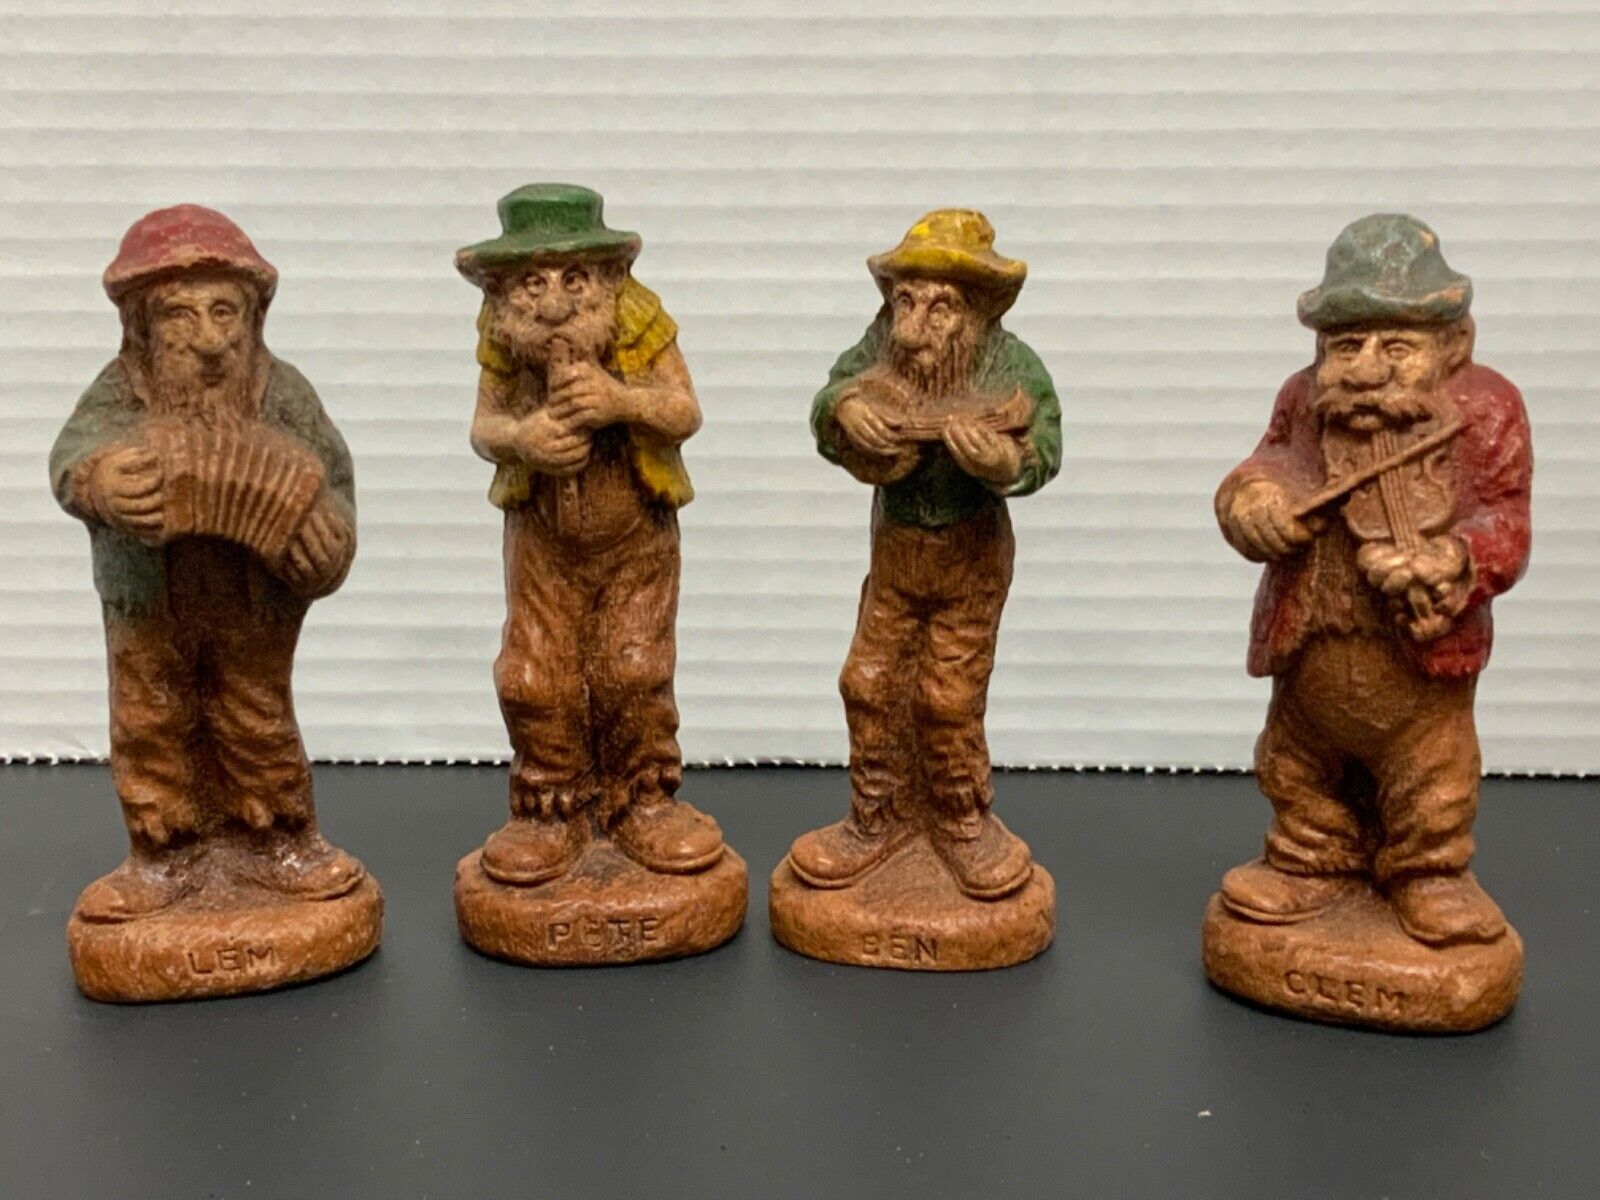 4 VINTAGE 1940s SYROCO HILLBILLY BAND FIGURES